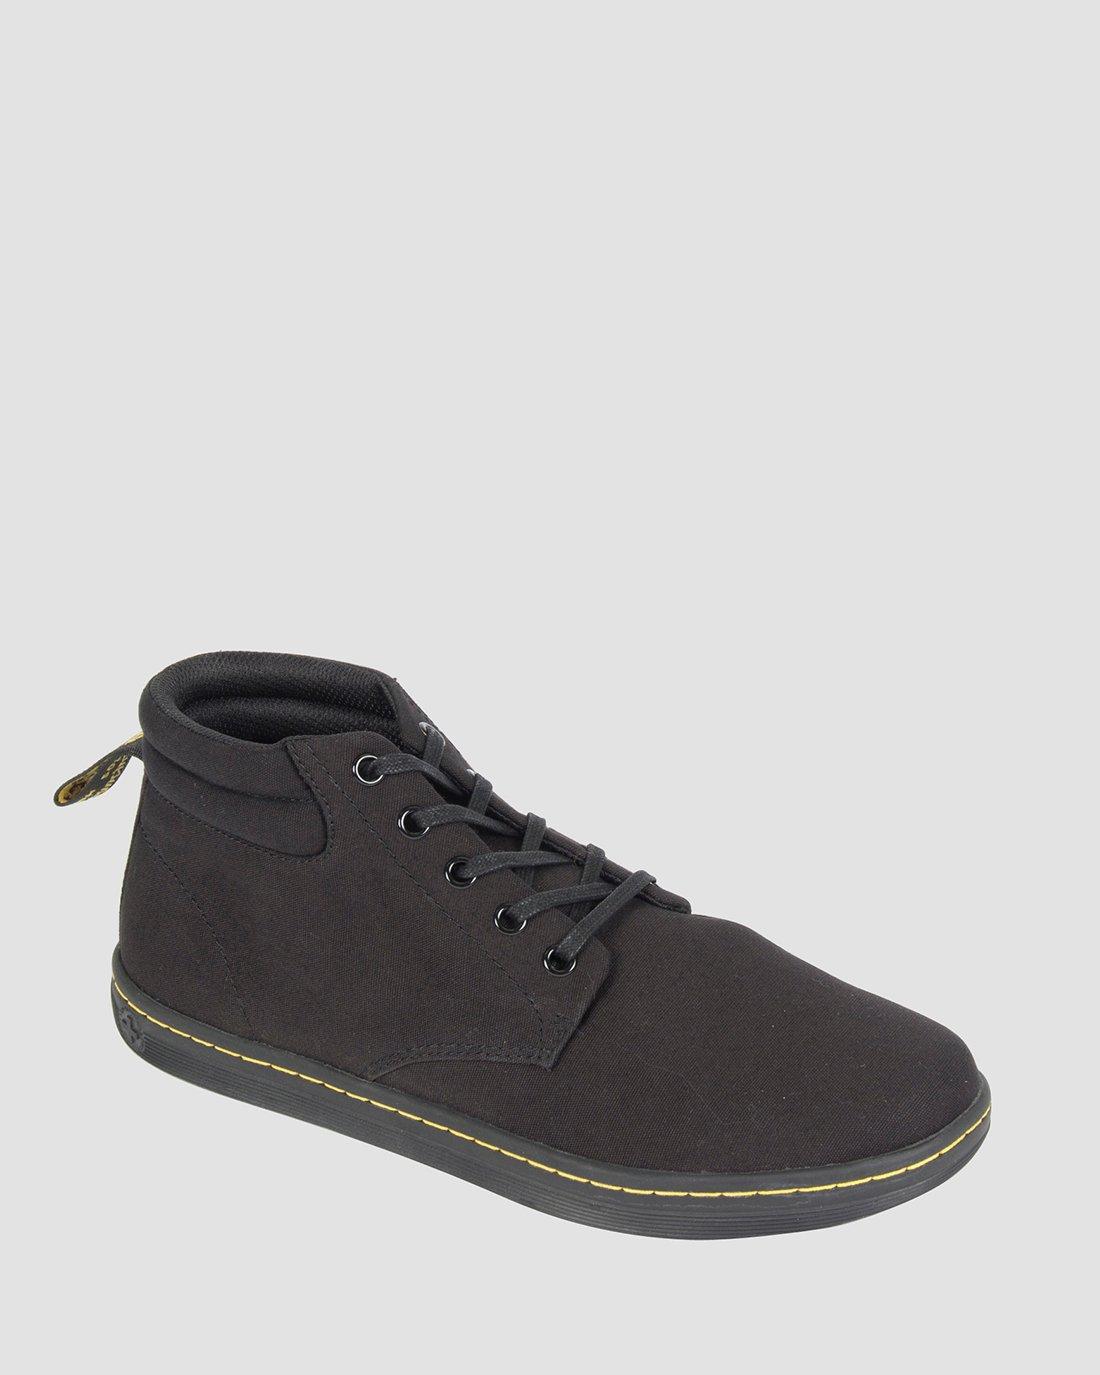 CANVAS CASUAL BOOTS | Dr. Martens Official